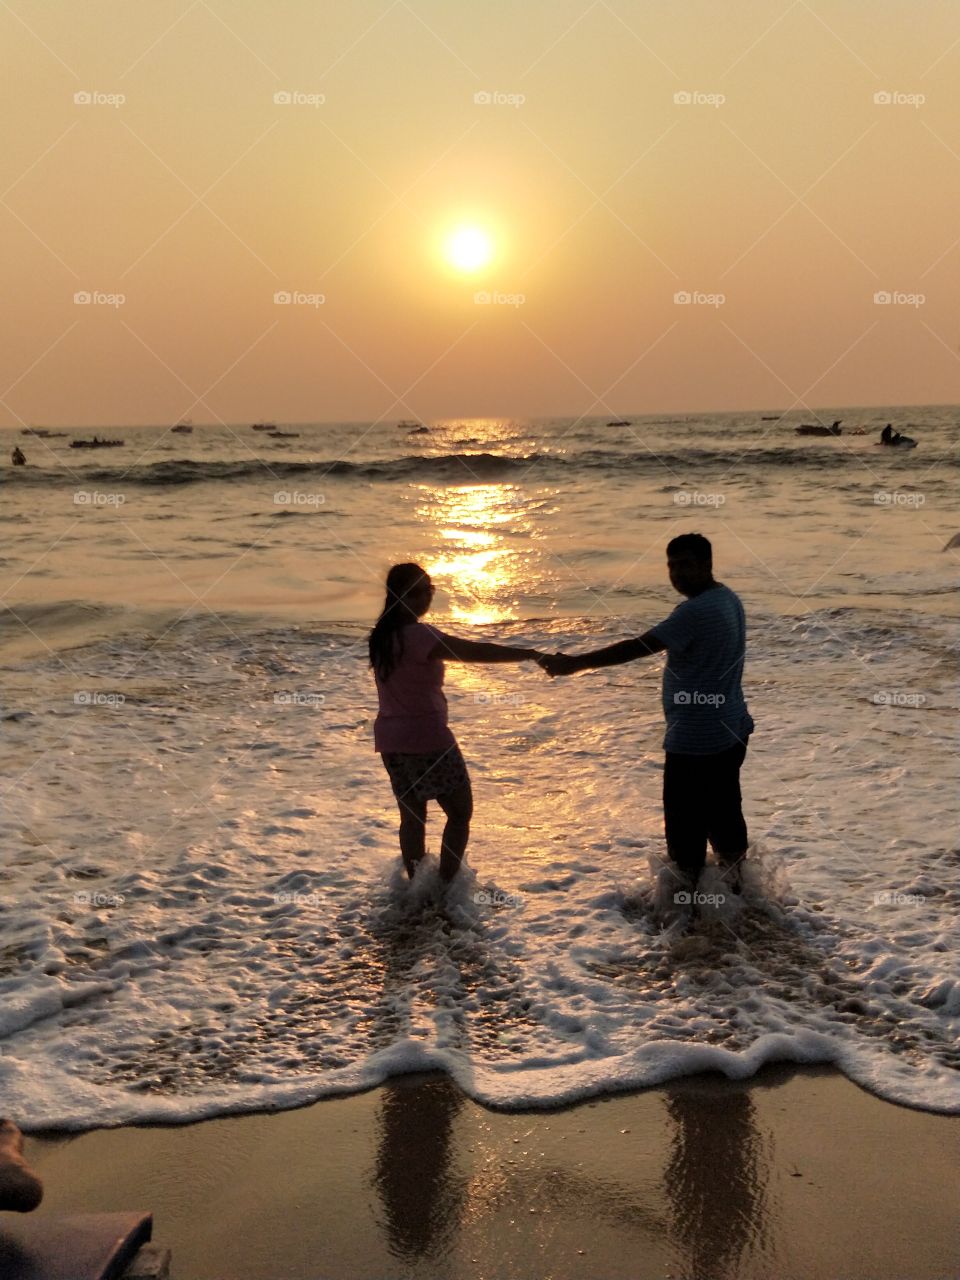 dawn of the day. sunset time. couple at the beach at sunset time. sea, ocean, romance, nature, evening